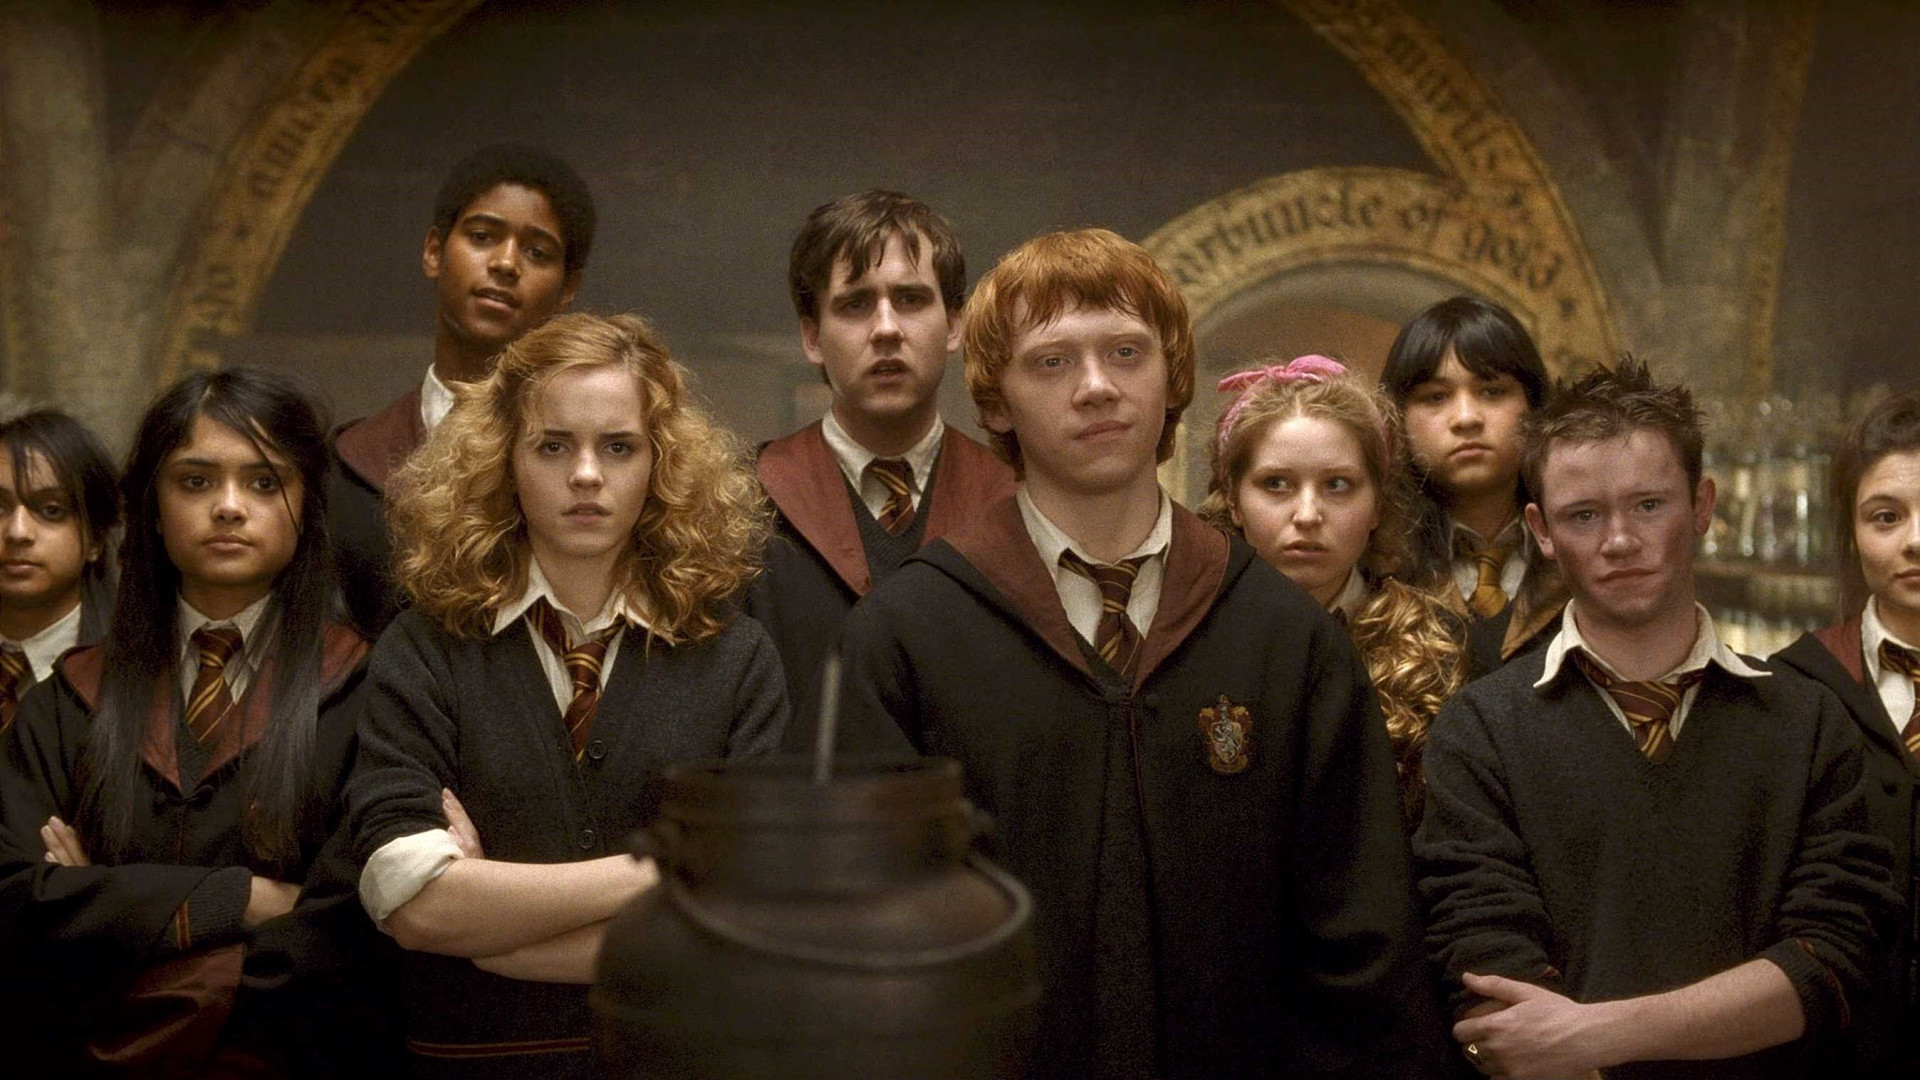 The official website of 'Harry Potter' has picked out 29 signs that Hermione liked Ron from the beginning. He just made it difficult for himself.<p><a href="https://www.msn.com/en-us/community/channel/vid-7xx8mnucu55yw63we9va2gwr7uihbxwc68fxqp25x6tg4ftibpra?cvid=94631541bc0f4f89bfd59158d696ad7e">Follow us and access great exclusive content every day</a></p>